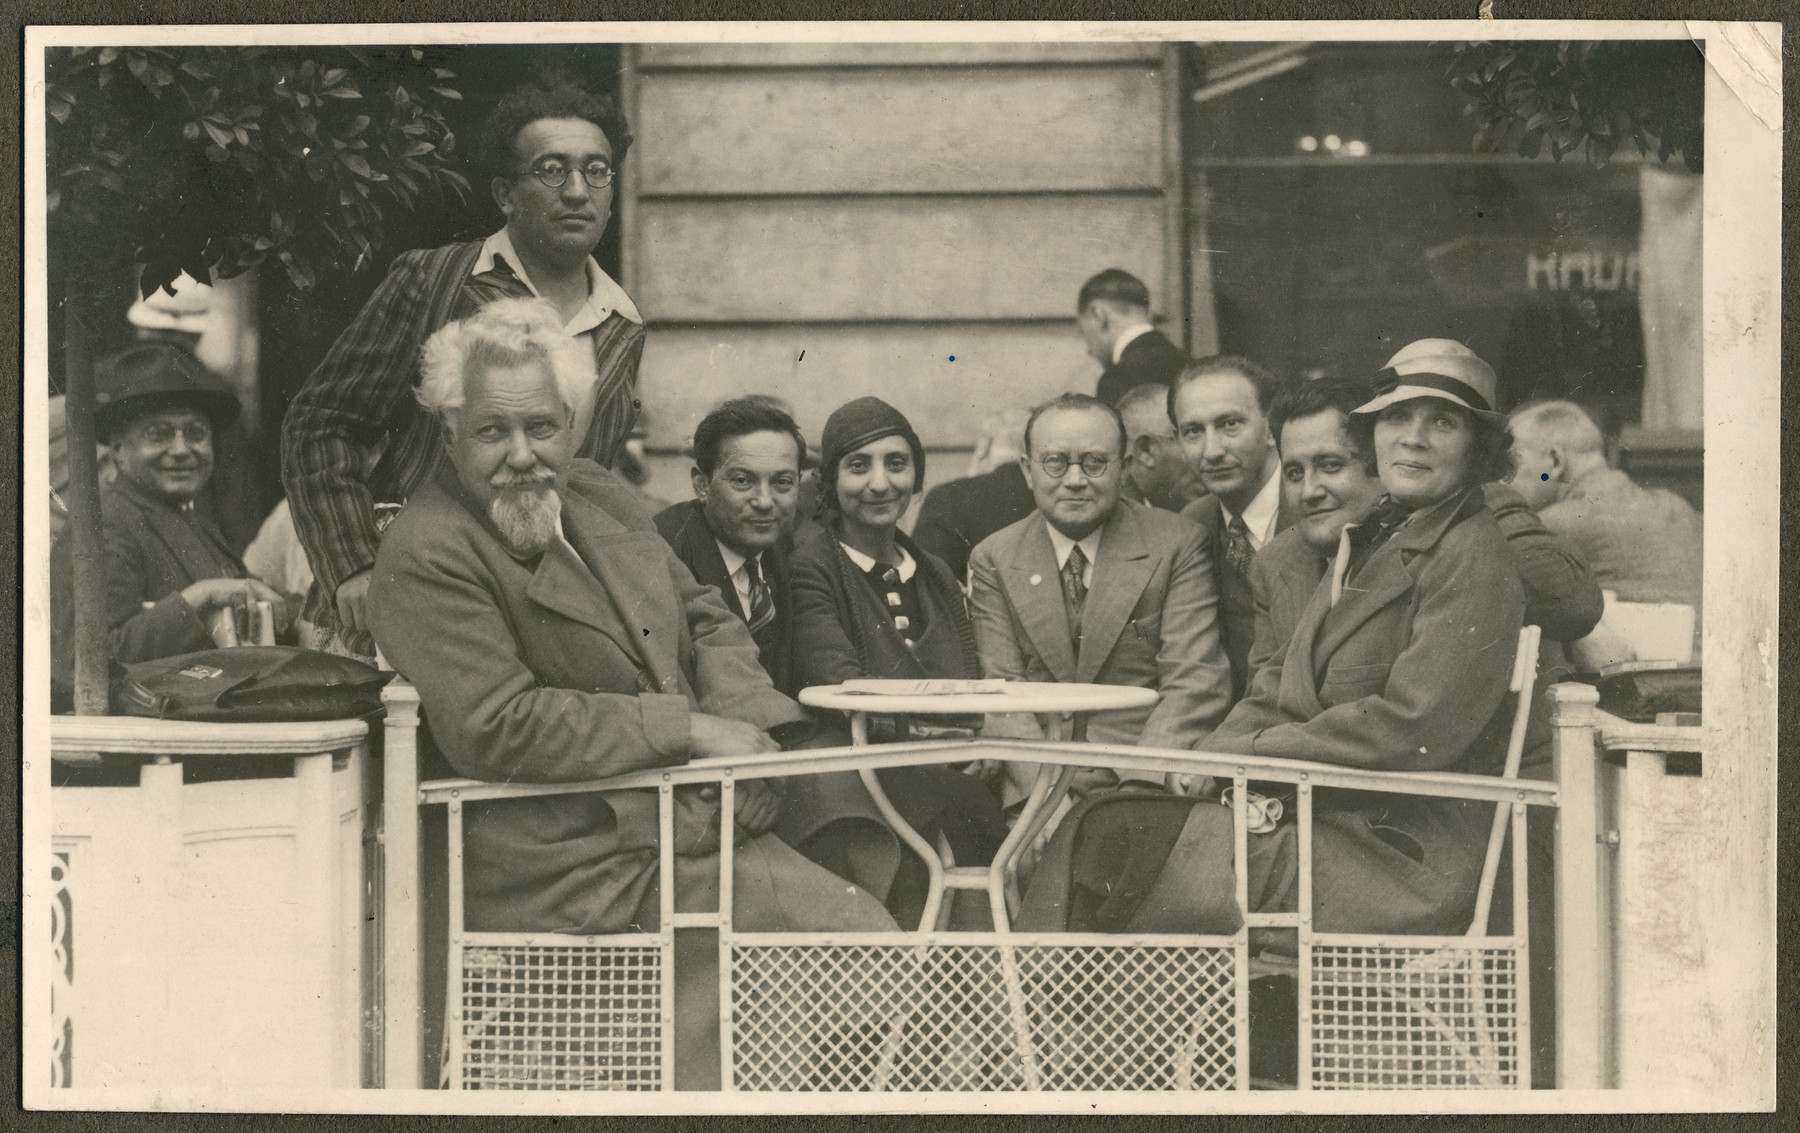 Zionist leaders gather at a cafe in Prague probably during the 18th Zionist Congress.

Menachem Ussishkin is pictured on the left with the beard.  Samuel Gotz is pictured second from the right.